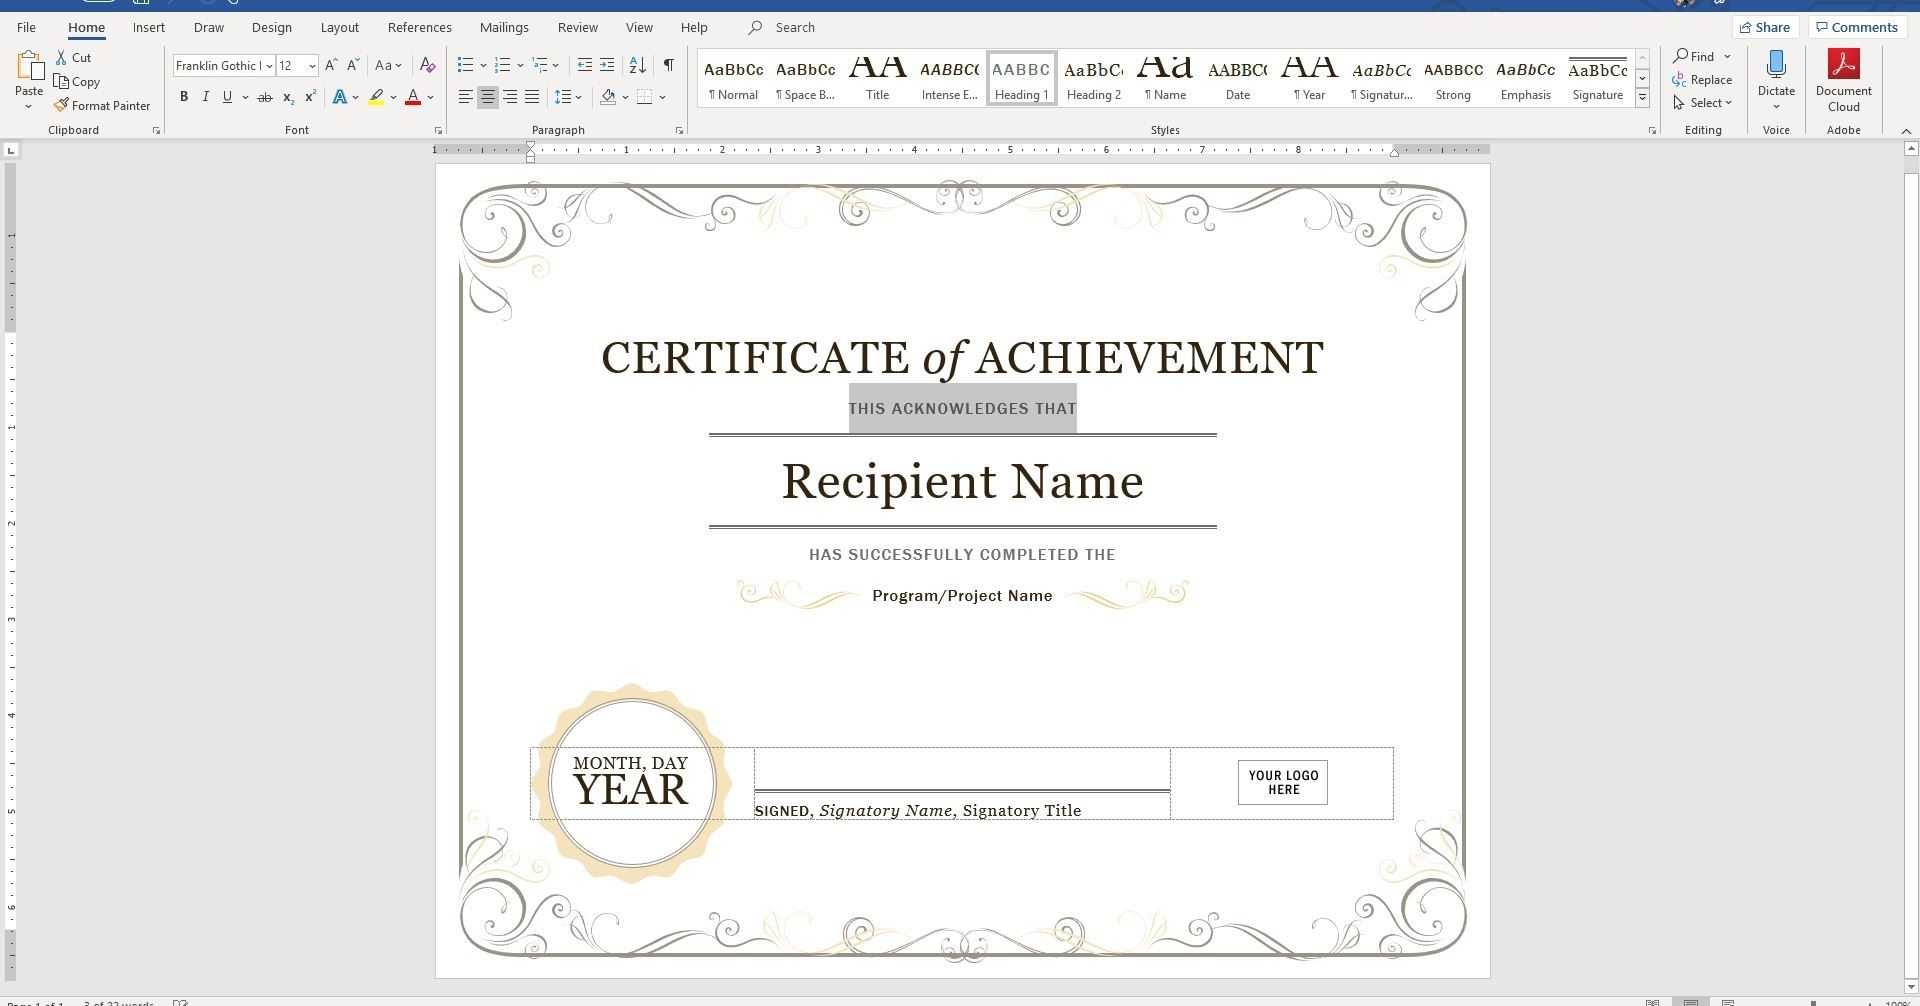 Certificate Template In Word | Safebest.xyz With Regard To Downloadable Certificate Templates For Microsoft Word